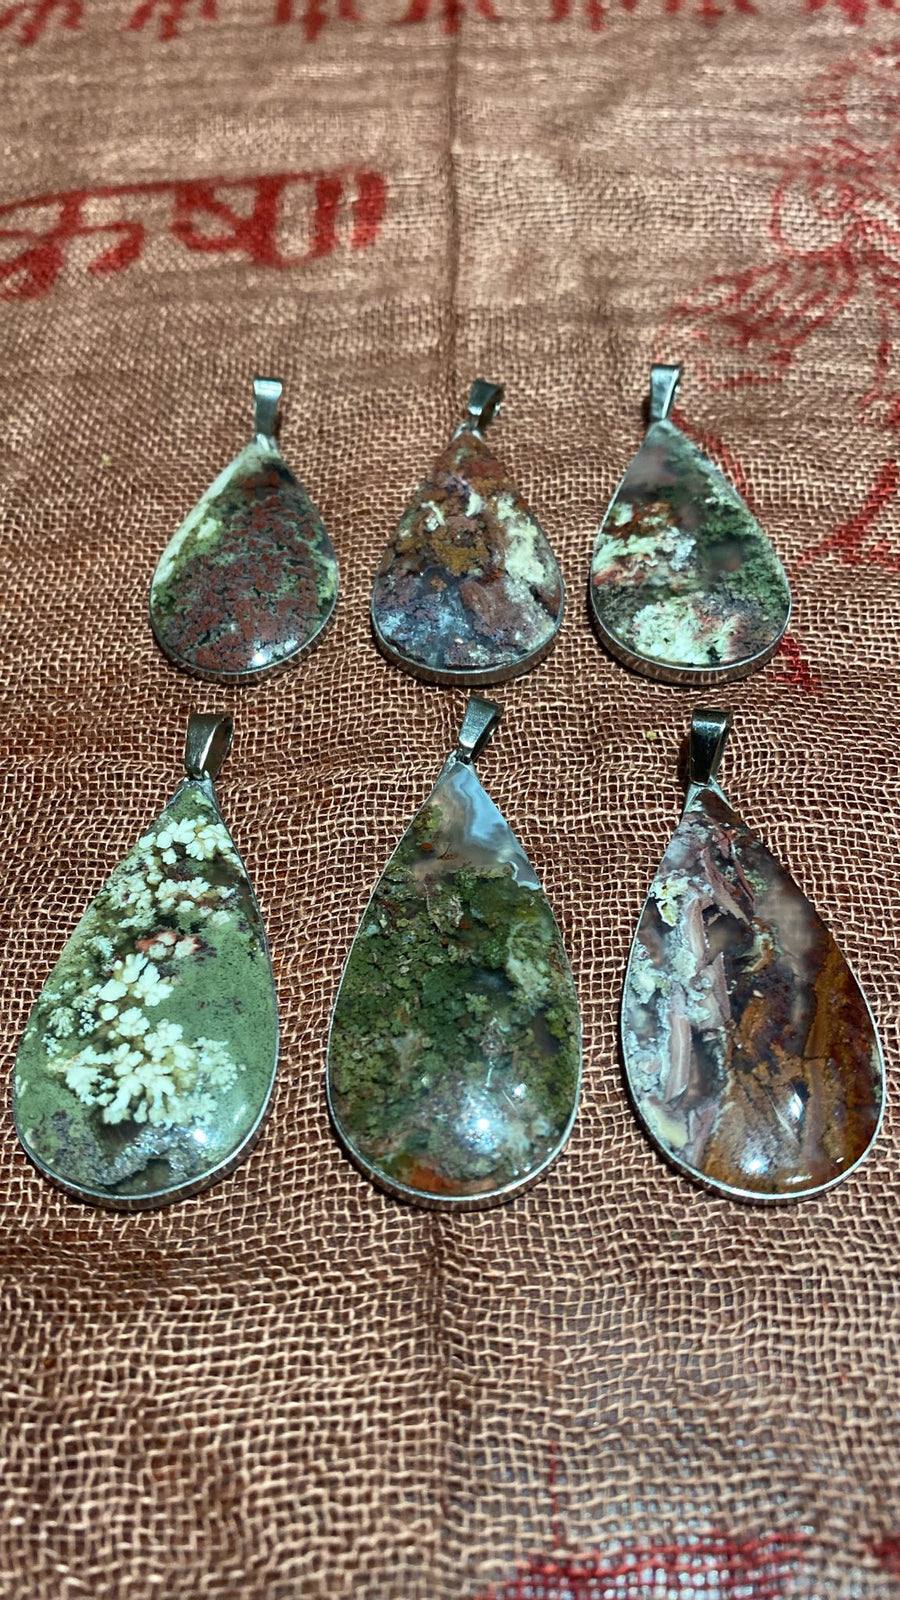 Moss Agate Pendant for sale